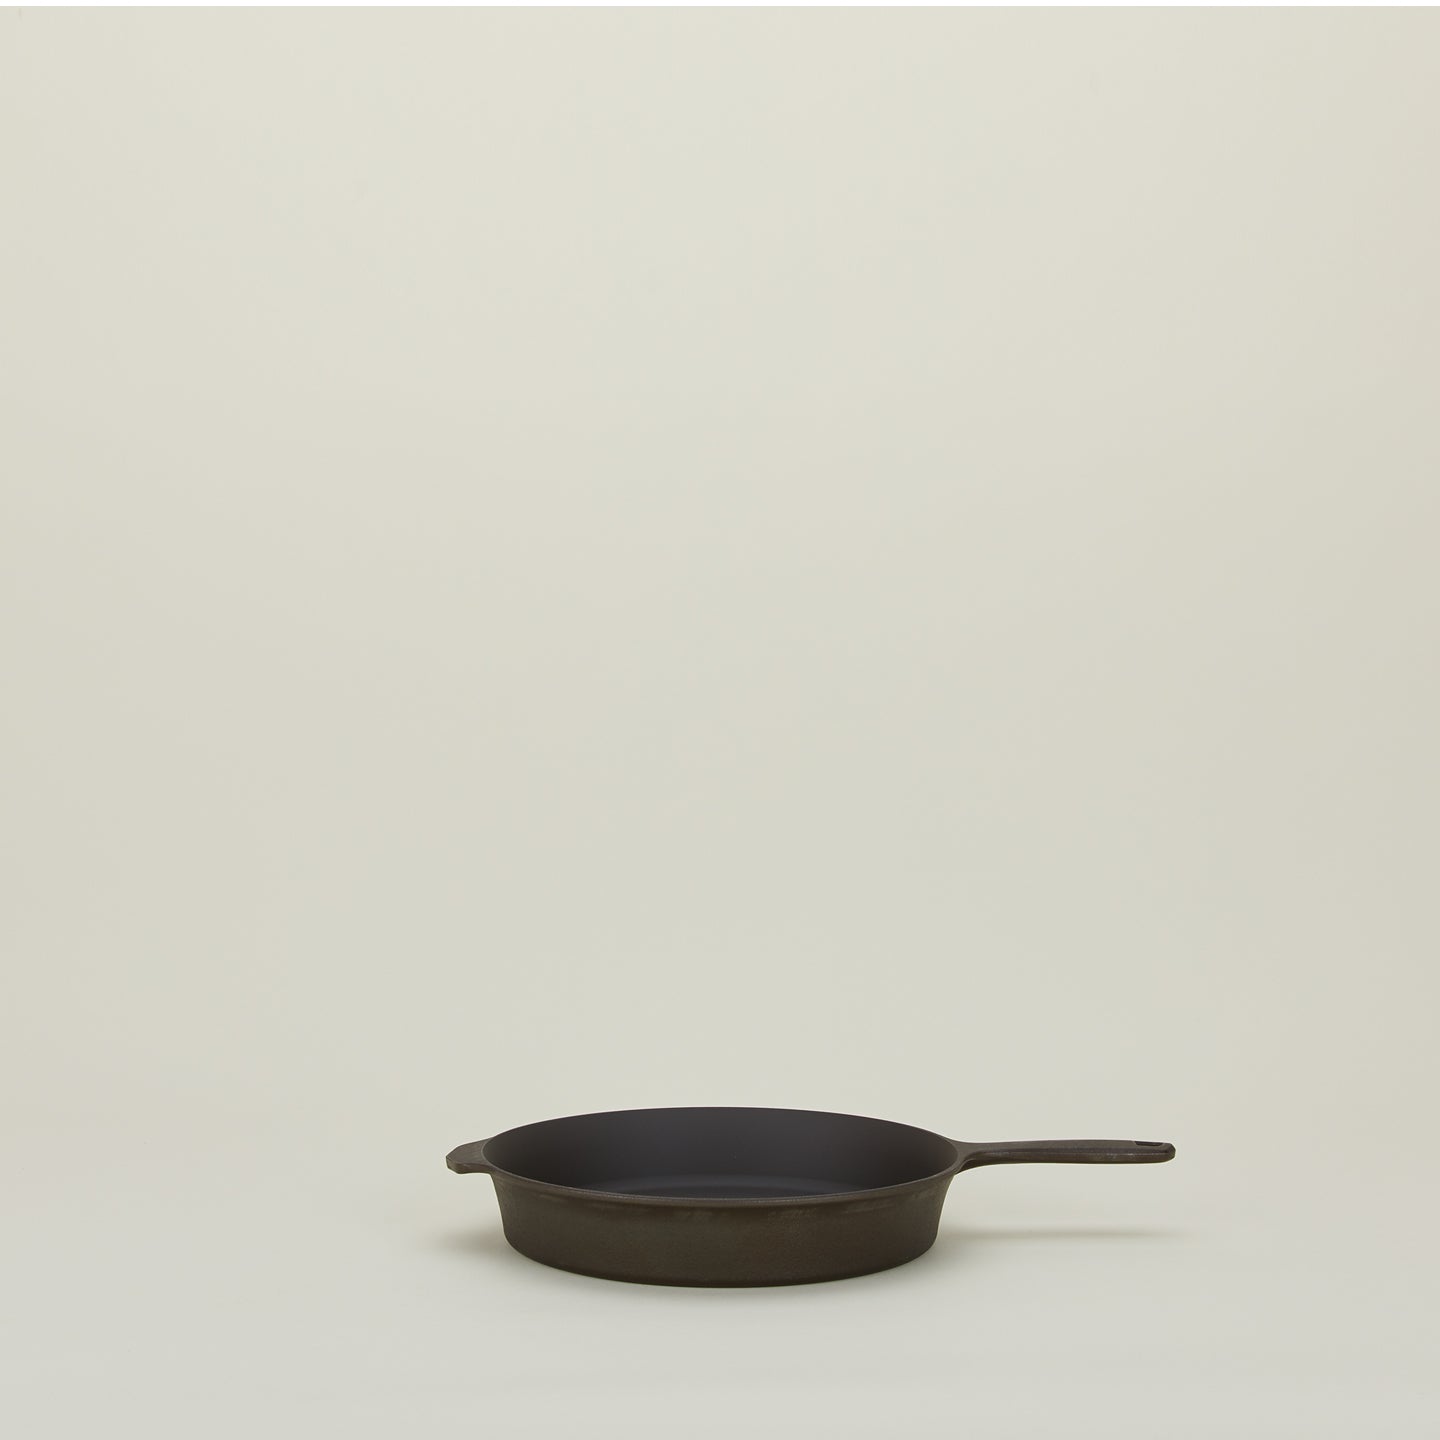 The Field Skillet: Lighter, Smoother Cast Iron by Field Company